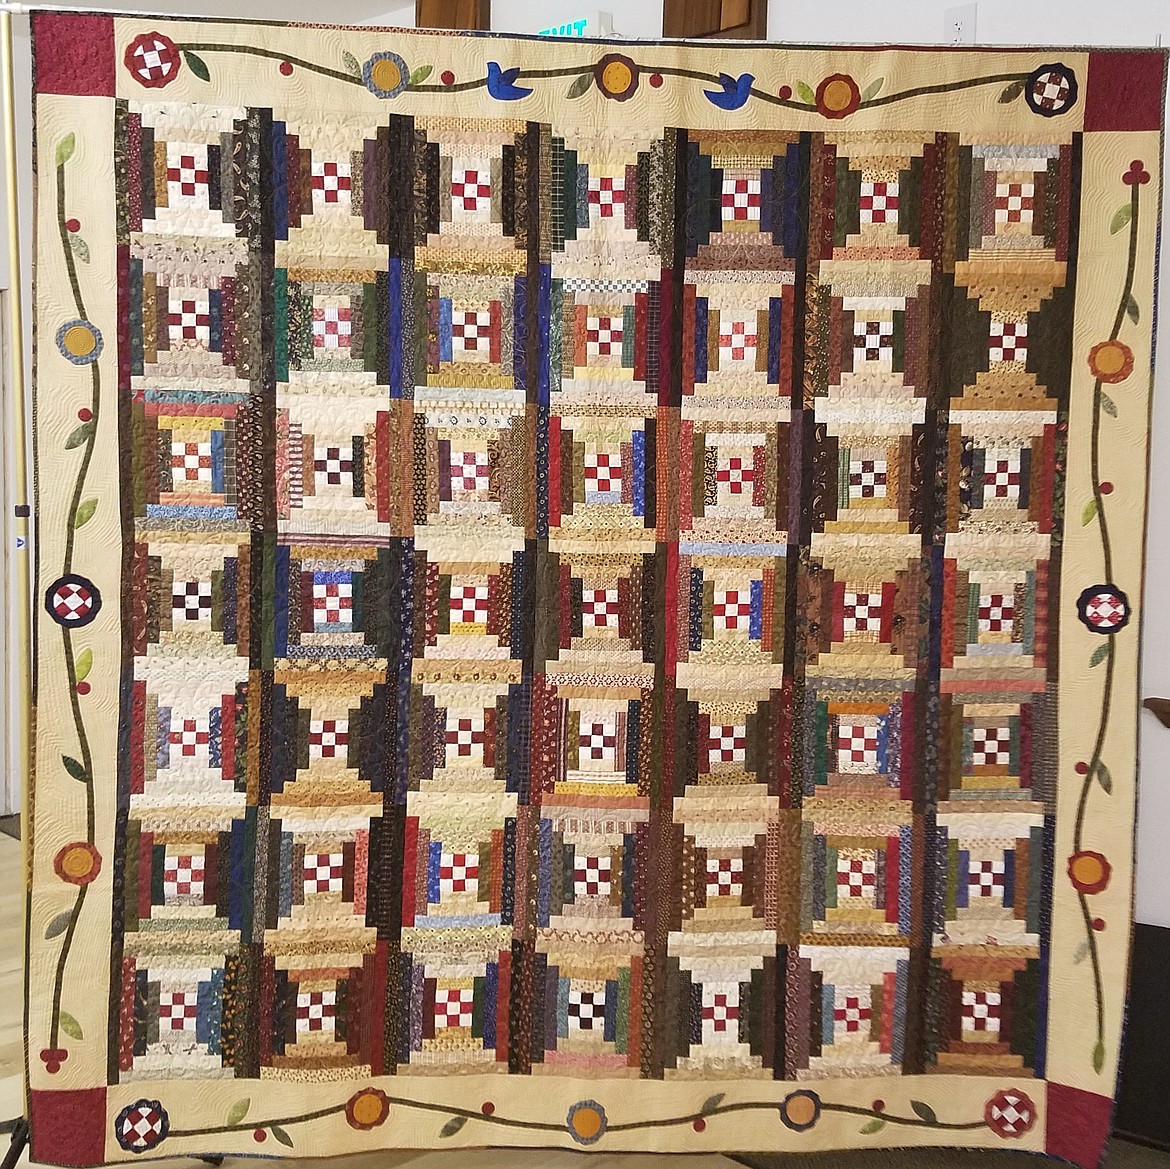 This quilt, &#147;Country Courthouse,&#148; made by the guild members, will be up for grabs during the quilt show raffle.